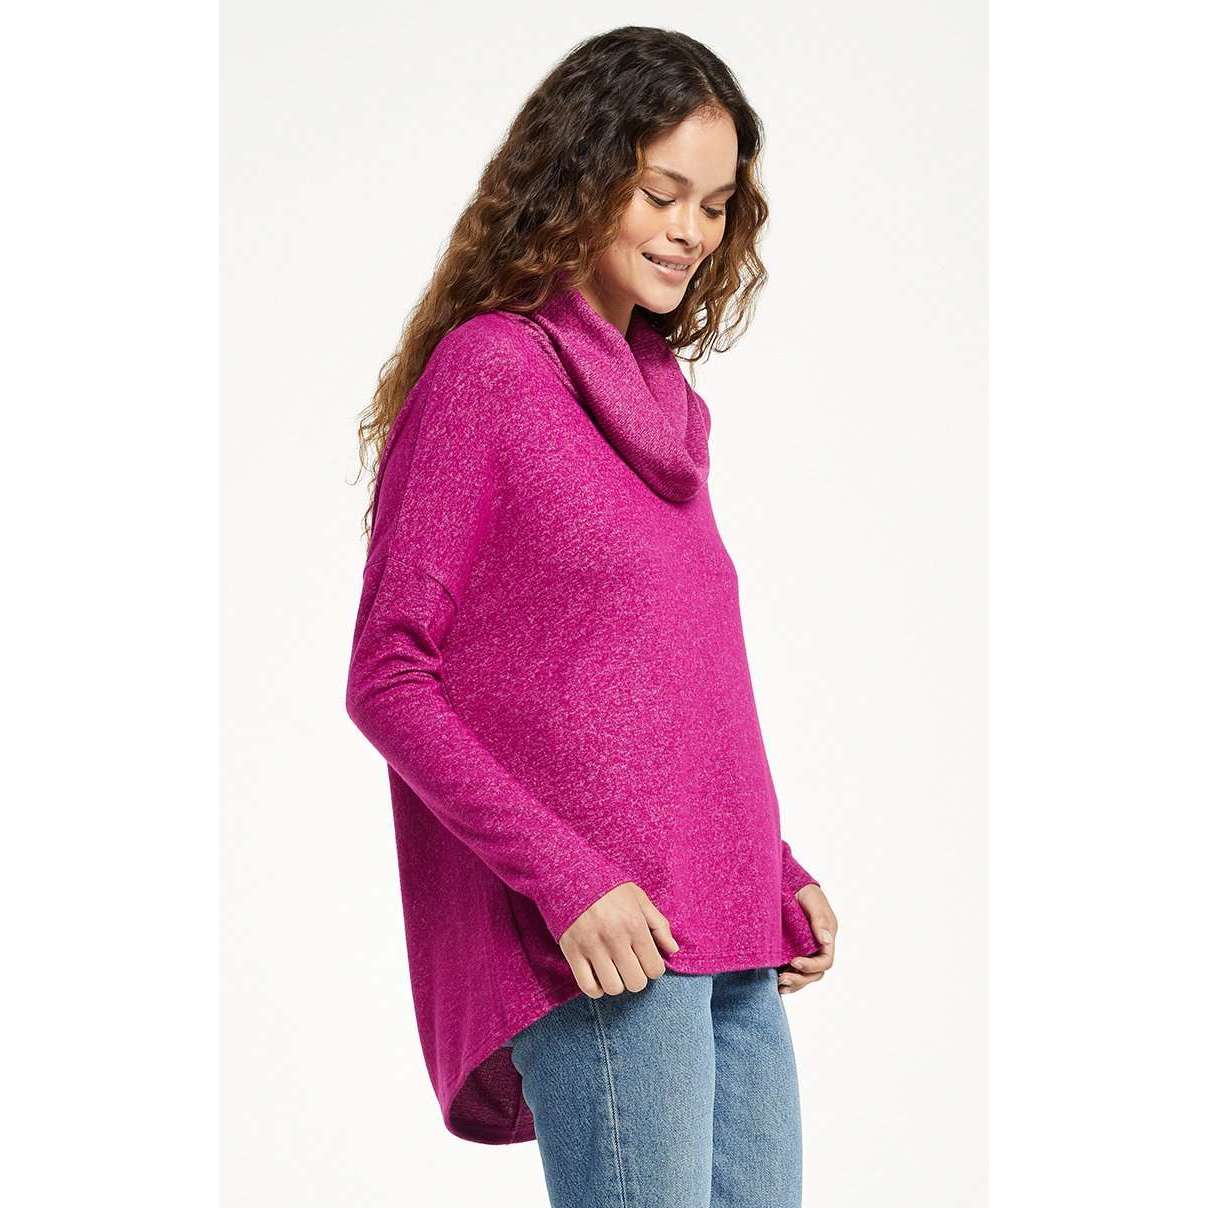 8.28 Boutique:Z-Supply,Z-Supply Melysa Cowl Neck Top in Jewel Pink,Shirts & Tops